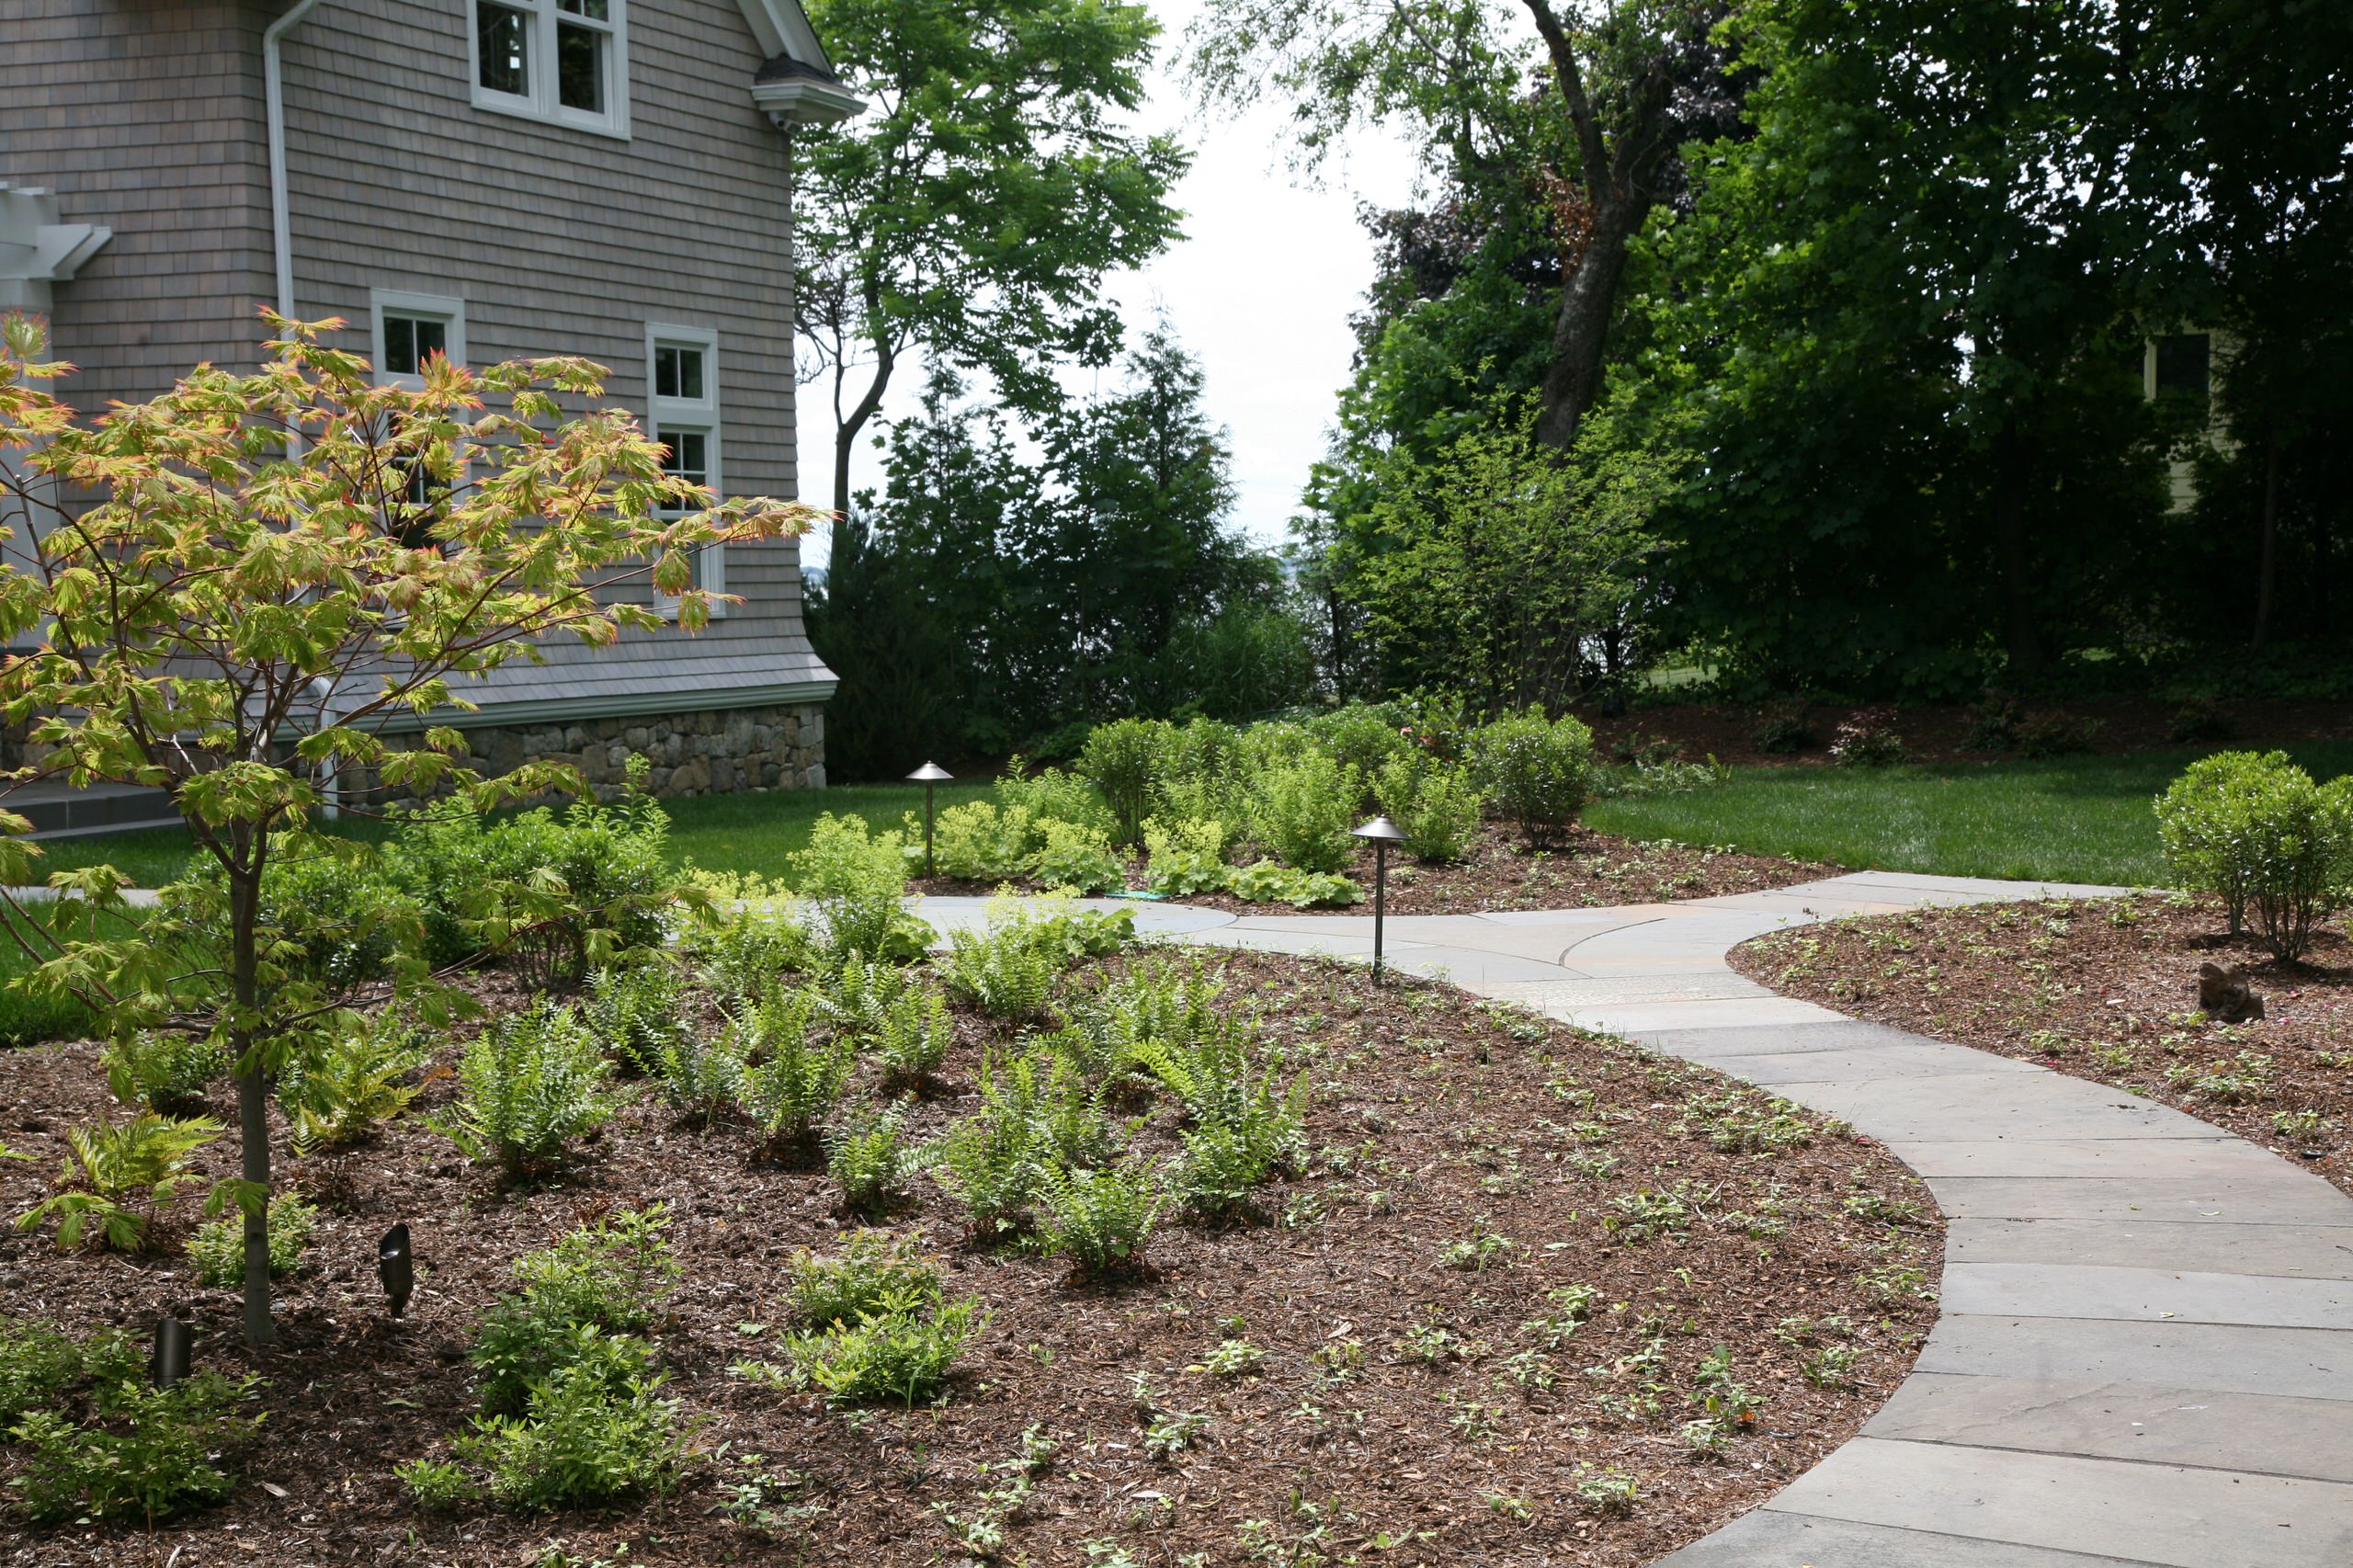 A bluestone path winds through the garden from guest parking to front entrance.